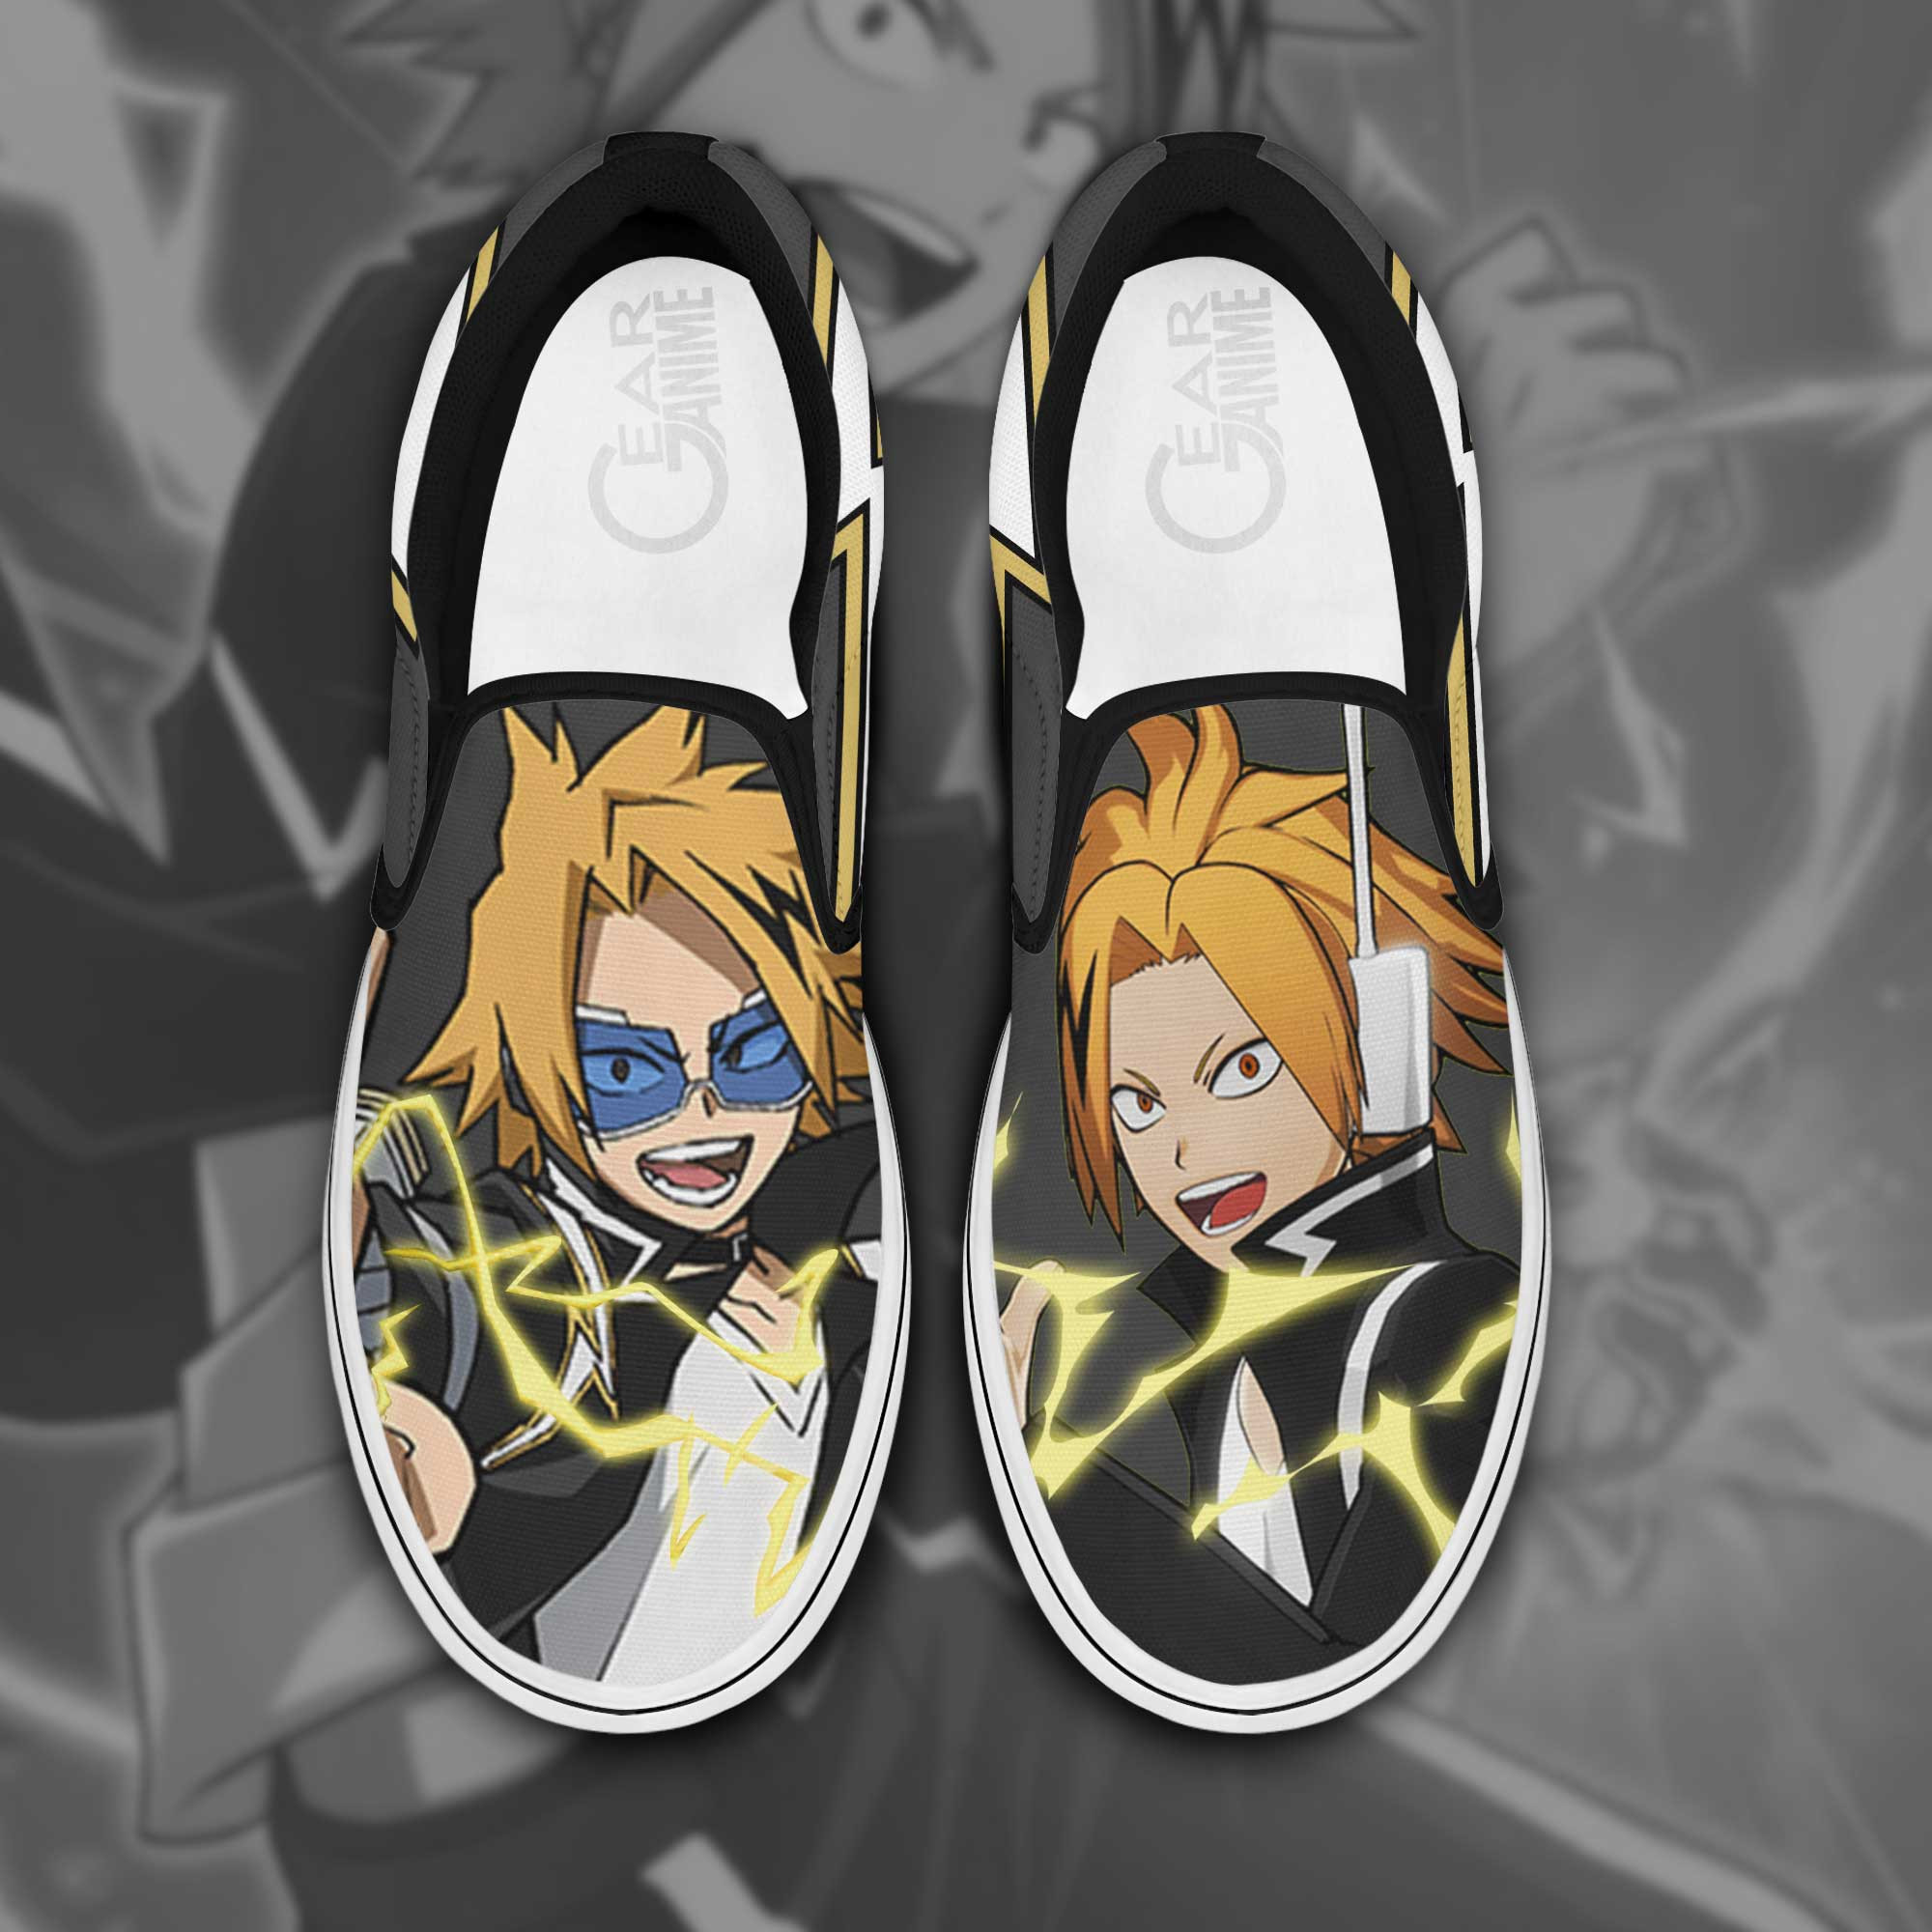 These Sneakers are a must-have for any Anime fan 56